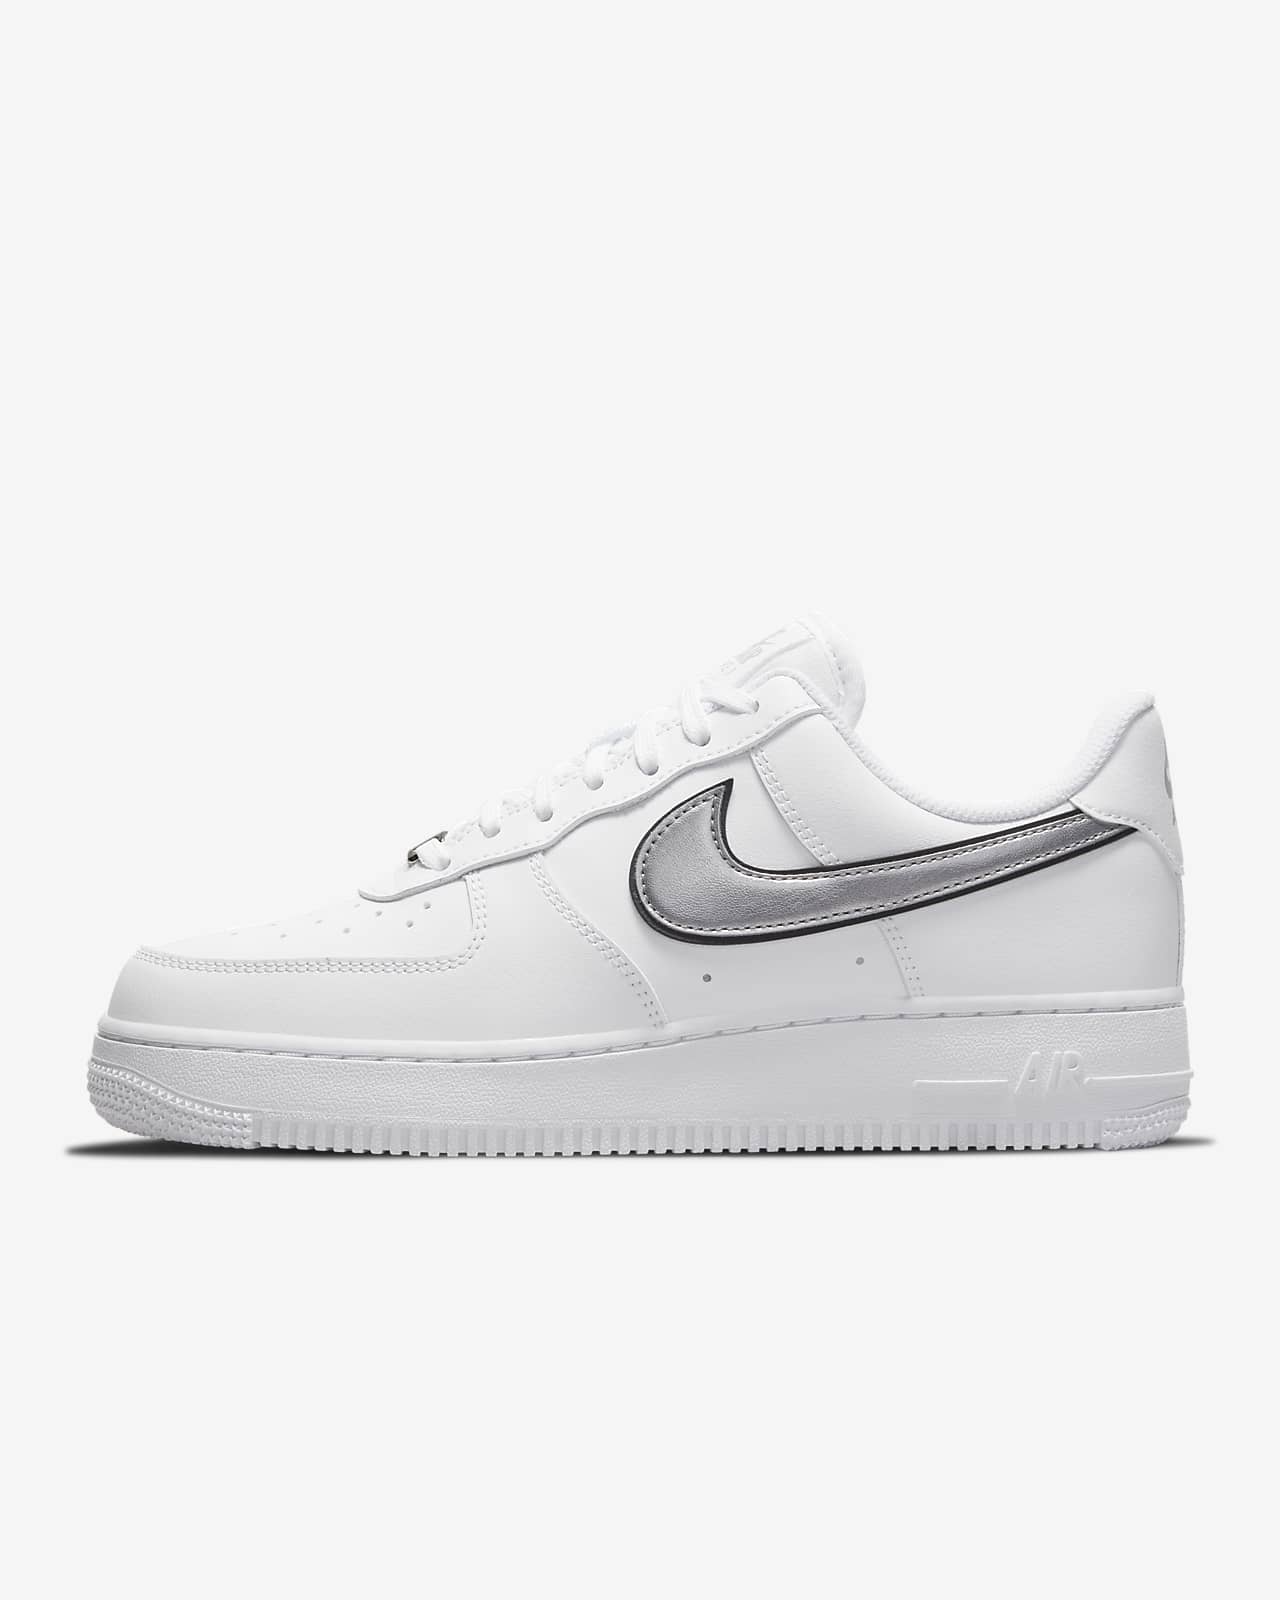 air force 1 07 donna bianche e rosse